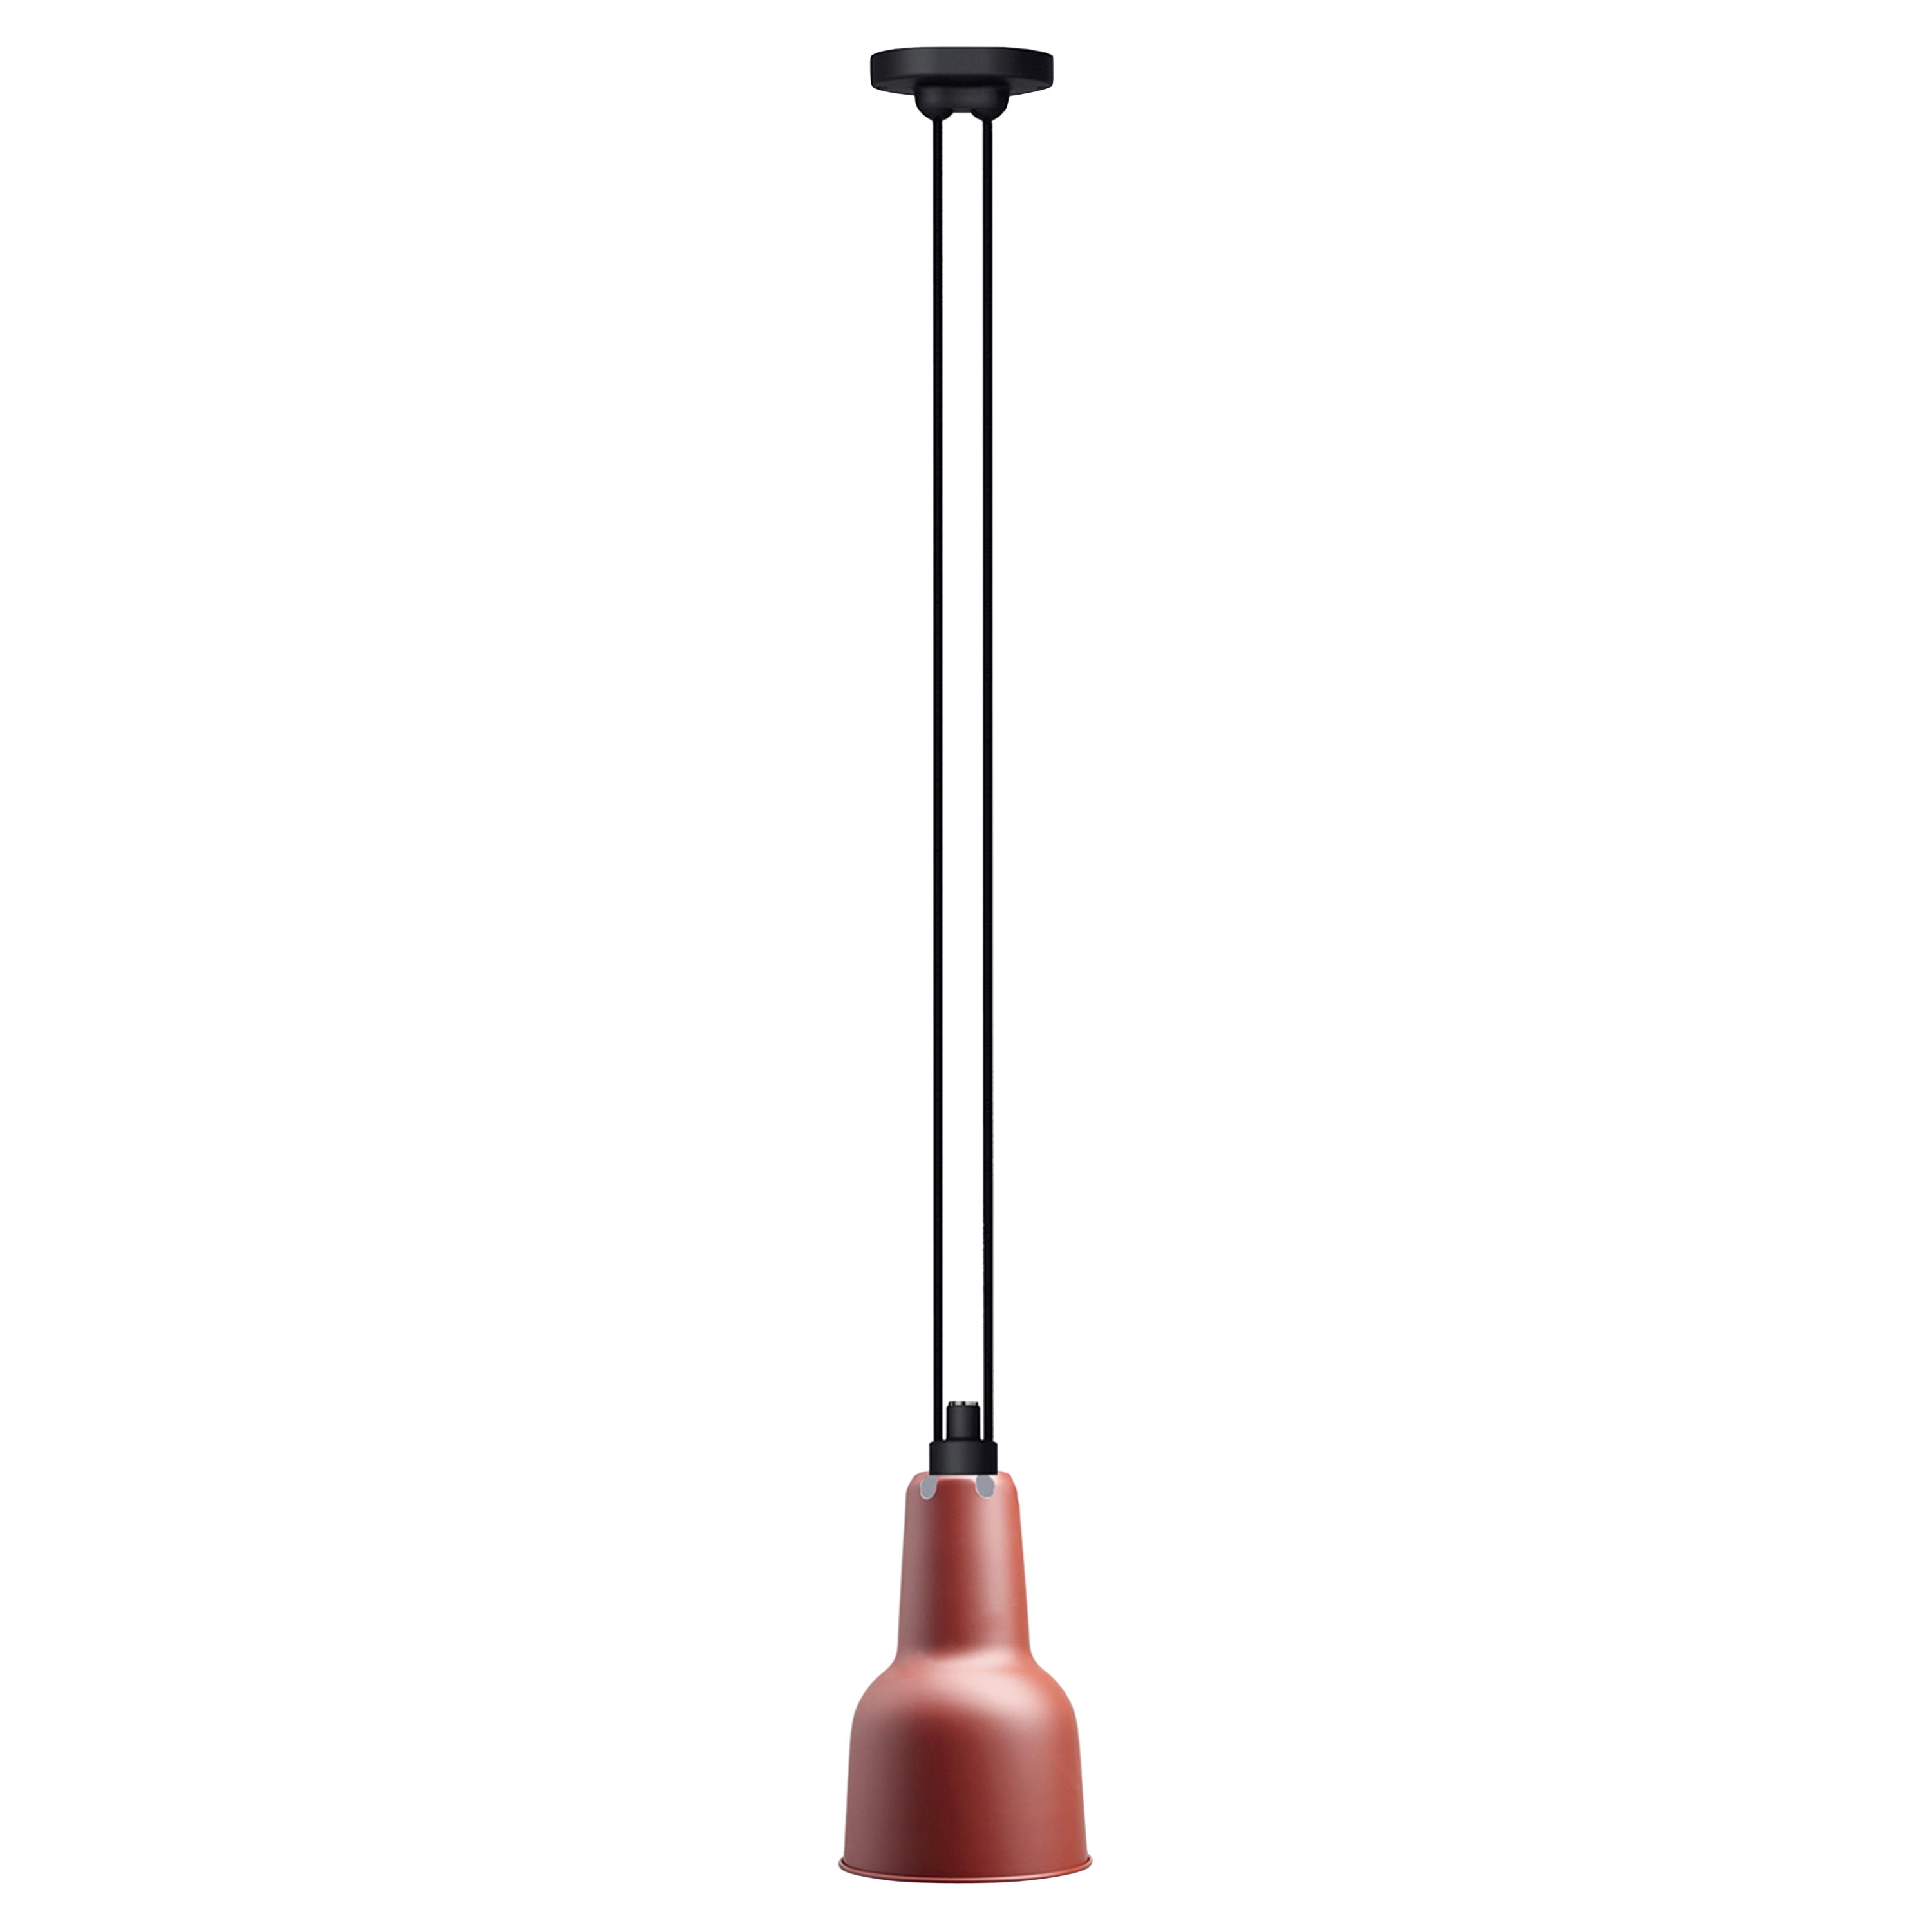 DCW Editions Les Acrobates N°322 Oculist Pendant Lamp in Red Shade